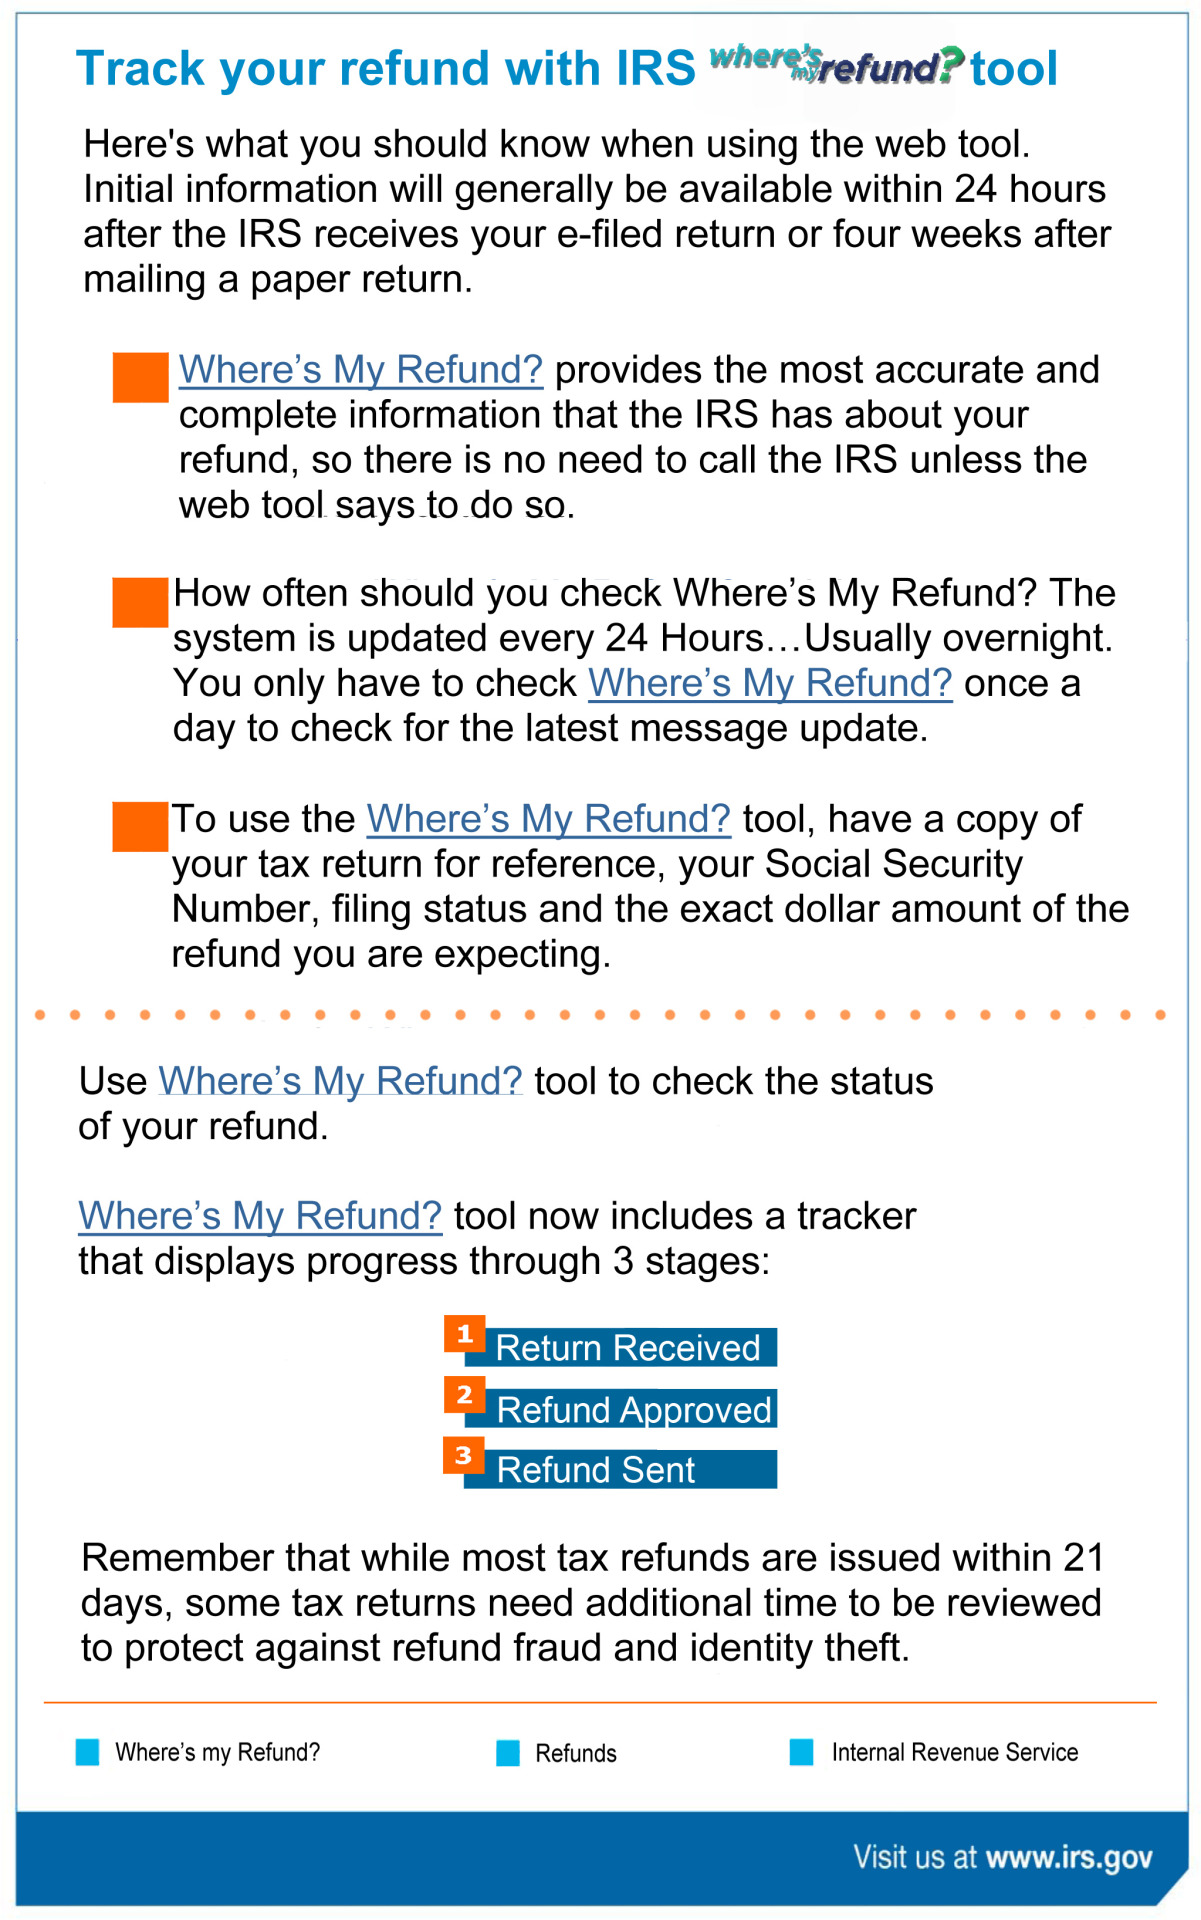 Where can you find the instructions for filling out the IRS.gov tax forms?